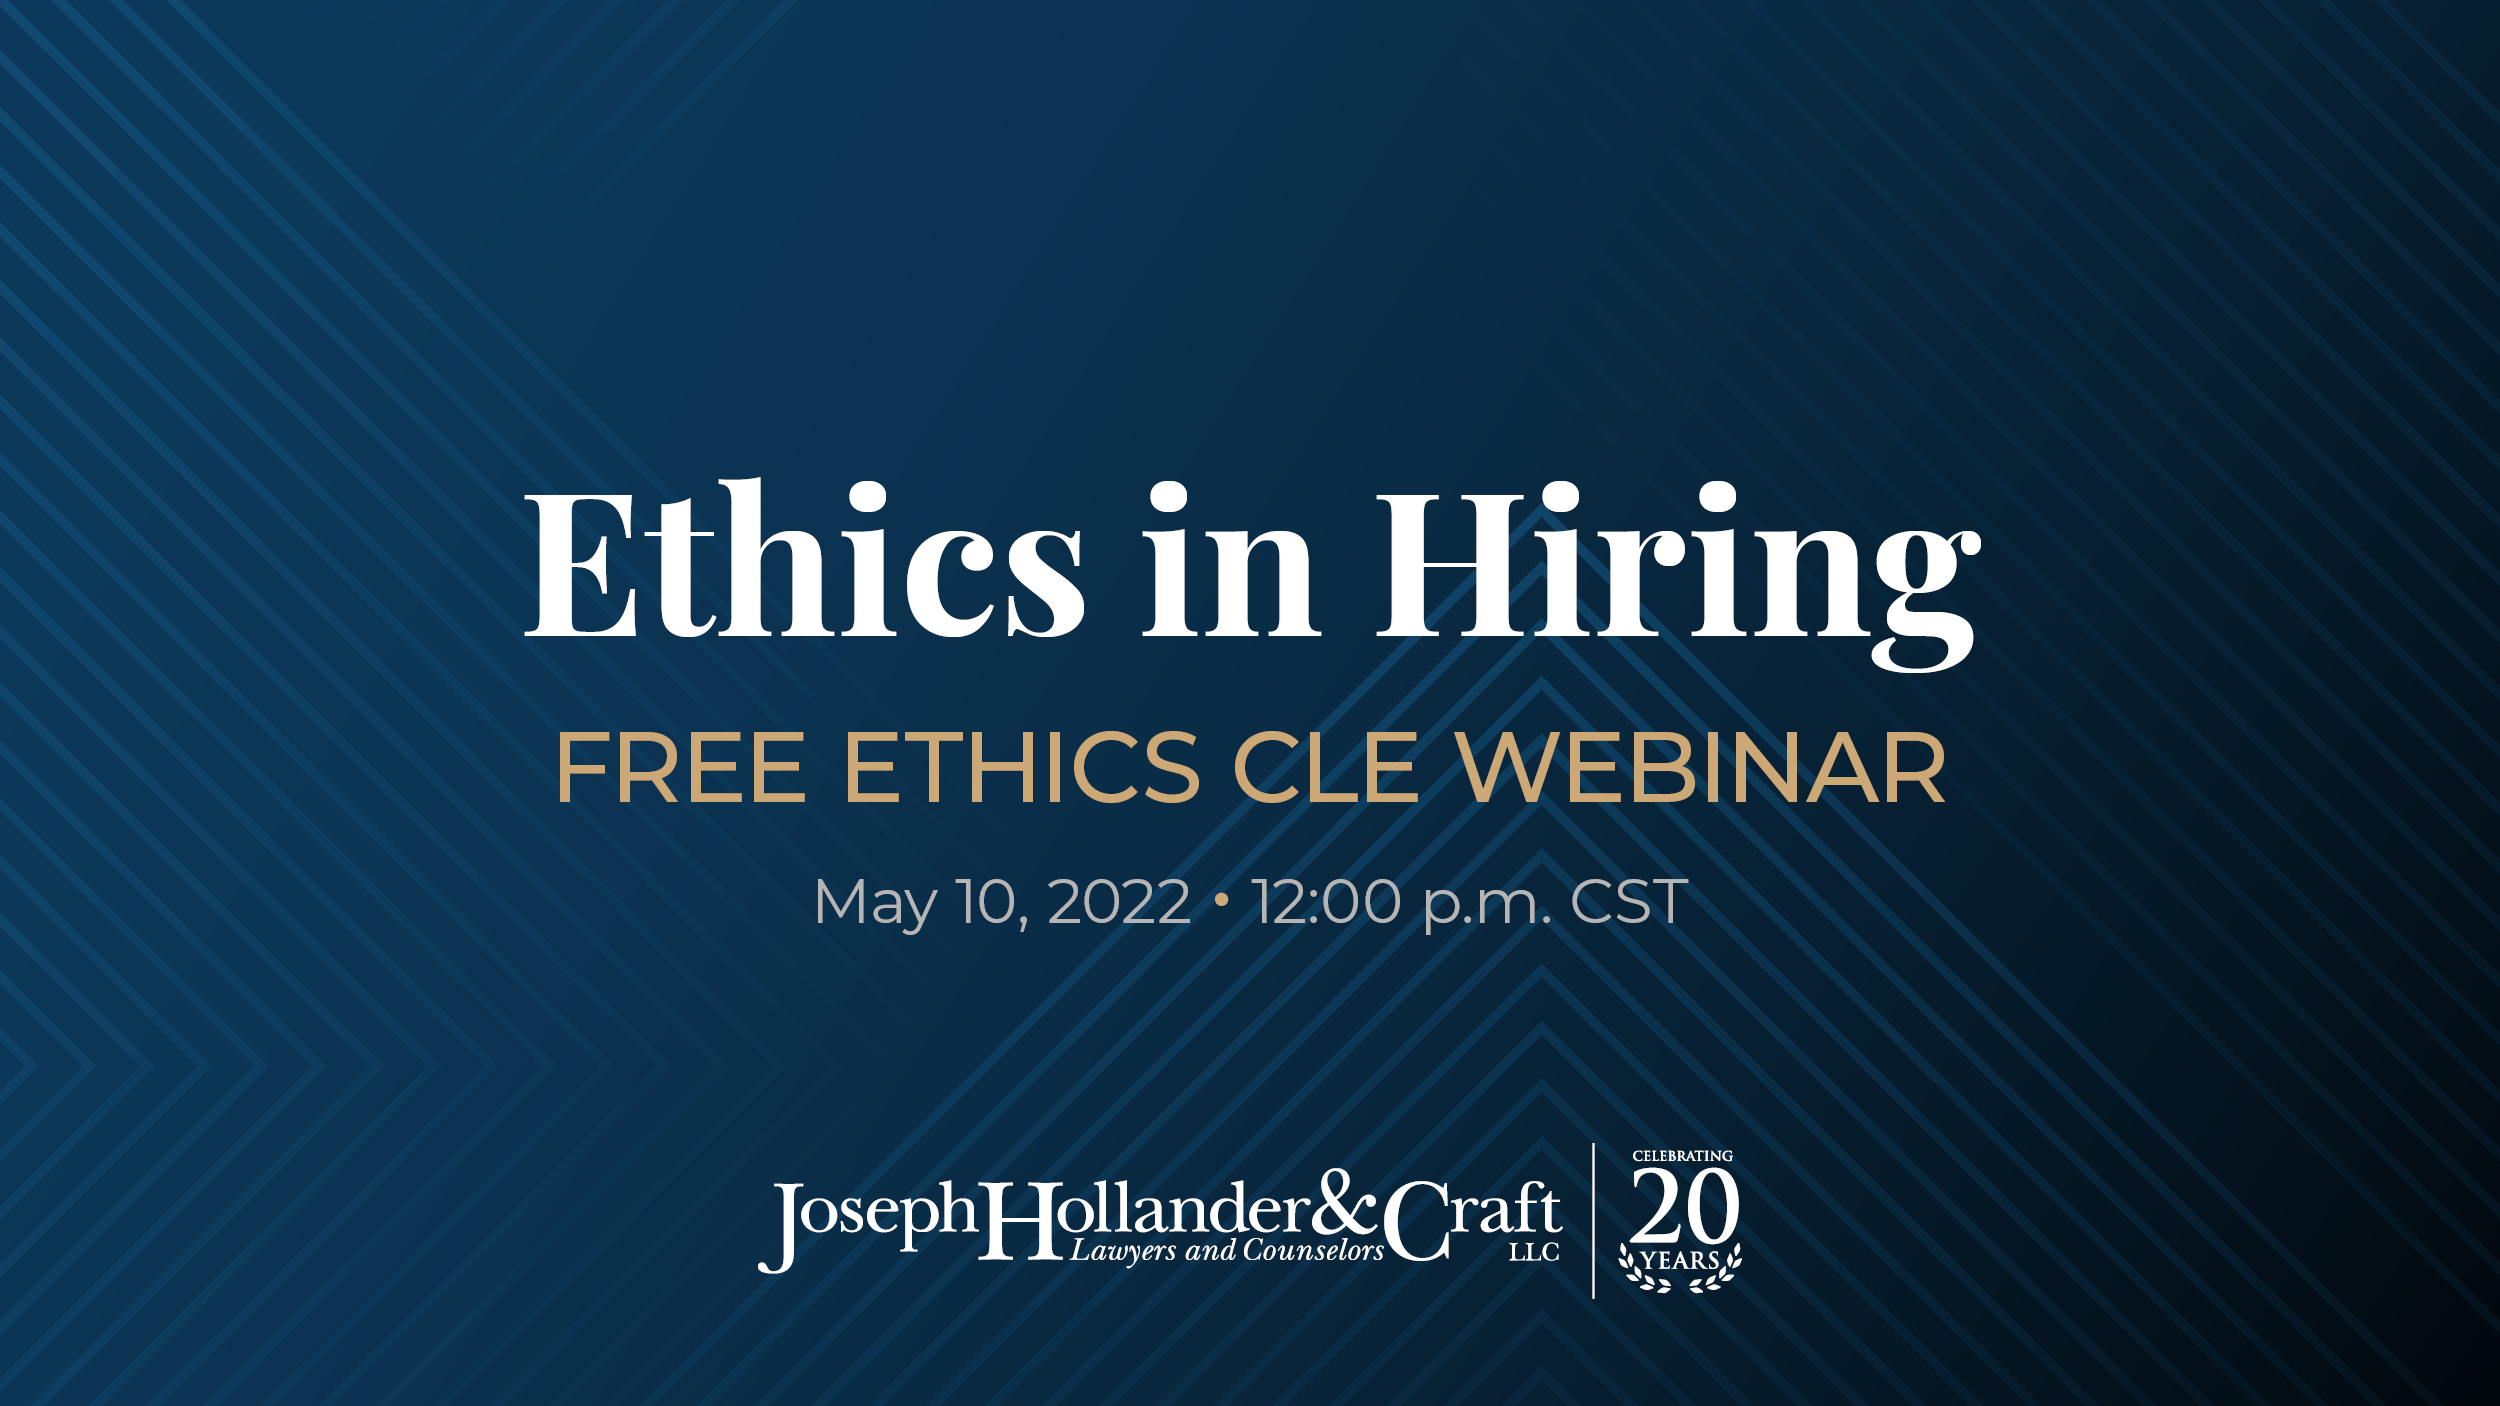 Ethics in Hiring Free Ethics CLE Webinar May 10 2022 12:00pm CST